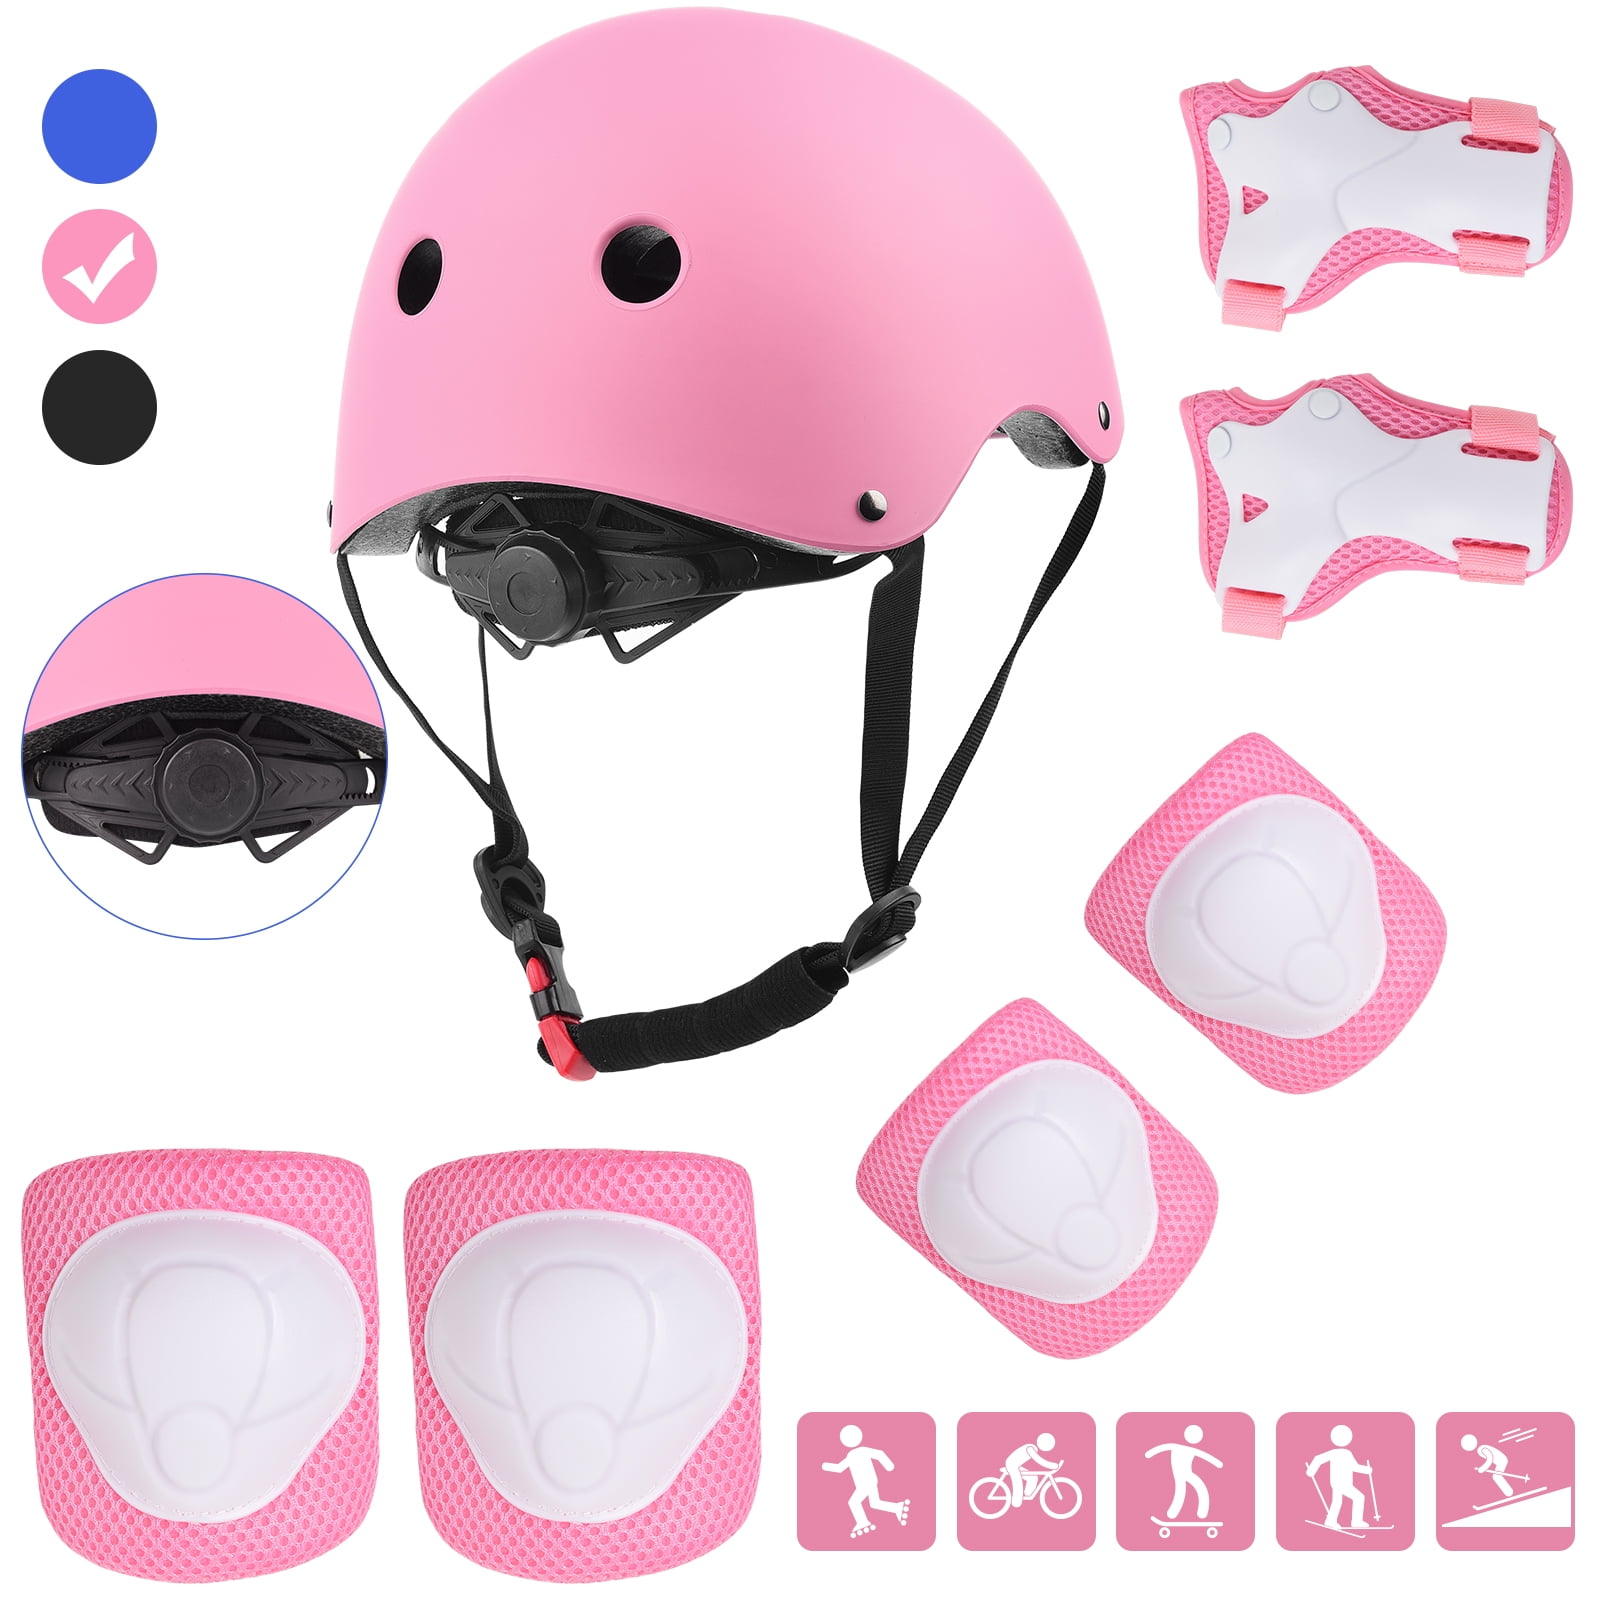 XIDAJIE Kids Helmet Protective Gear Set Boy Girl Adjustable Bike Cycling Helmets with Knee Pads Elbow Pads Wrist Guards for Skating Roller Scooter Outdoor Sports Blue